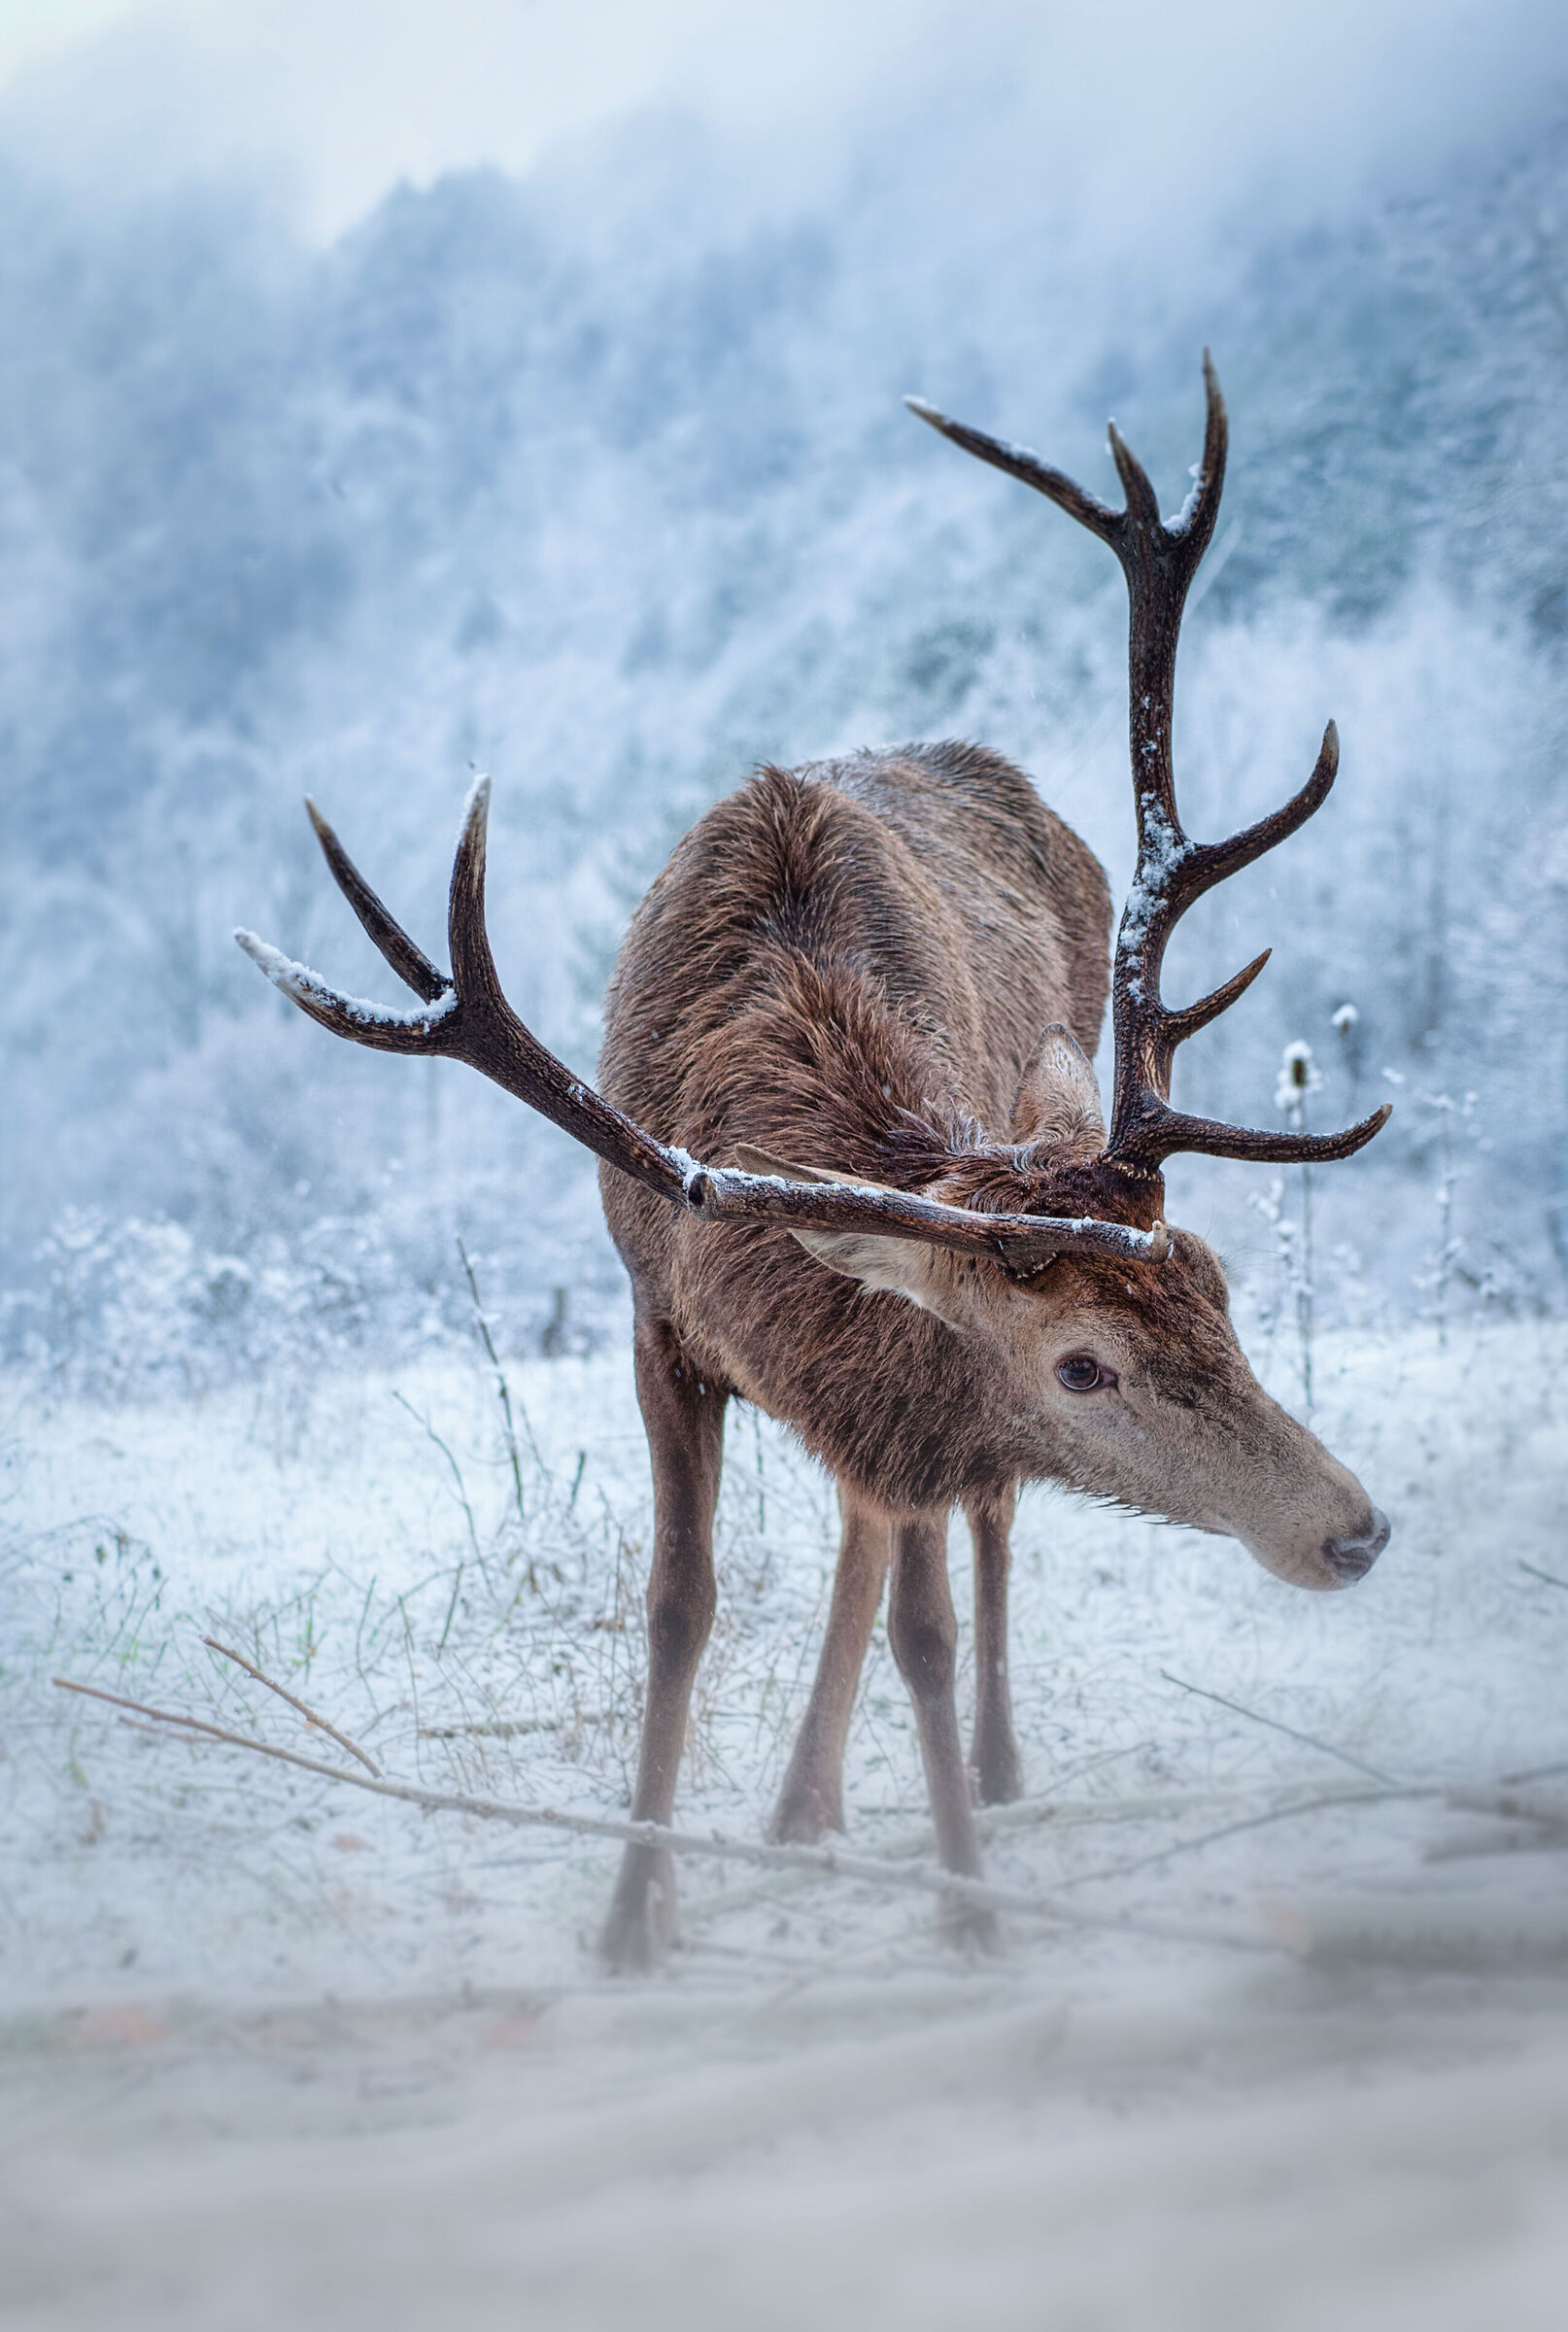 The deer and the snow...